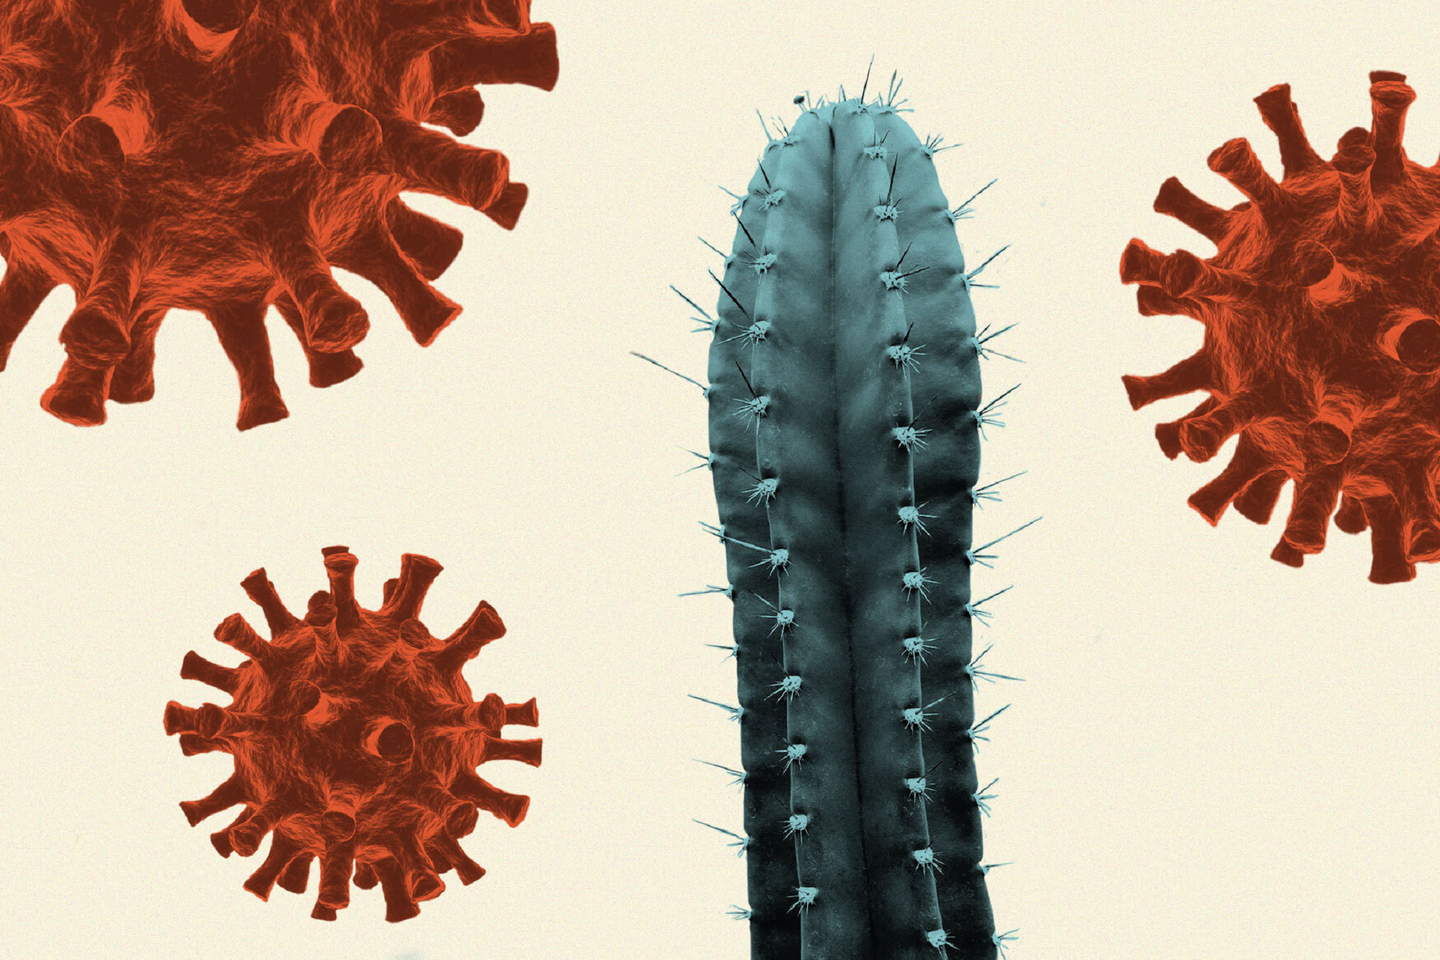 Spiky cactus and SARS-CoV-2 viral particles on a pale yellow background to represent COVID vaccines and infertility misinformation